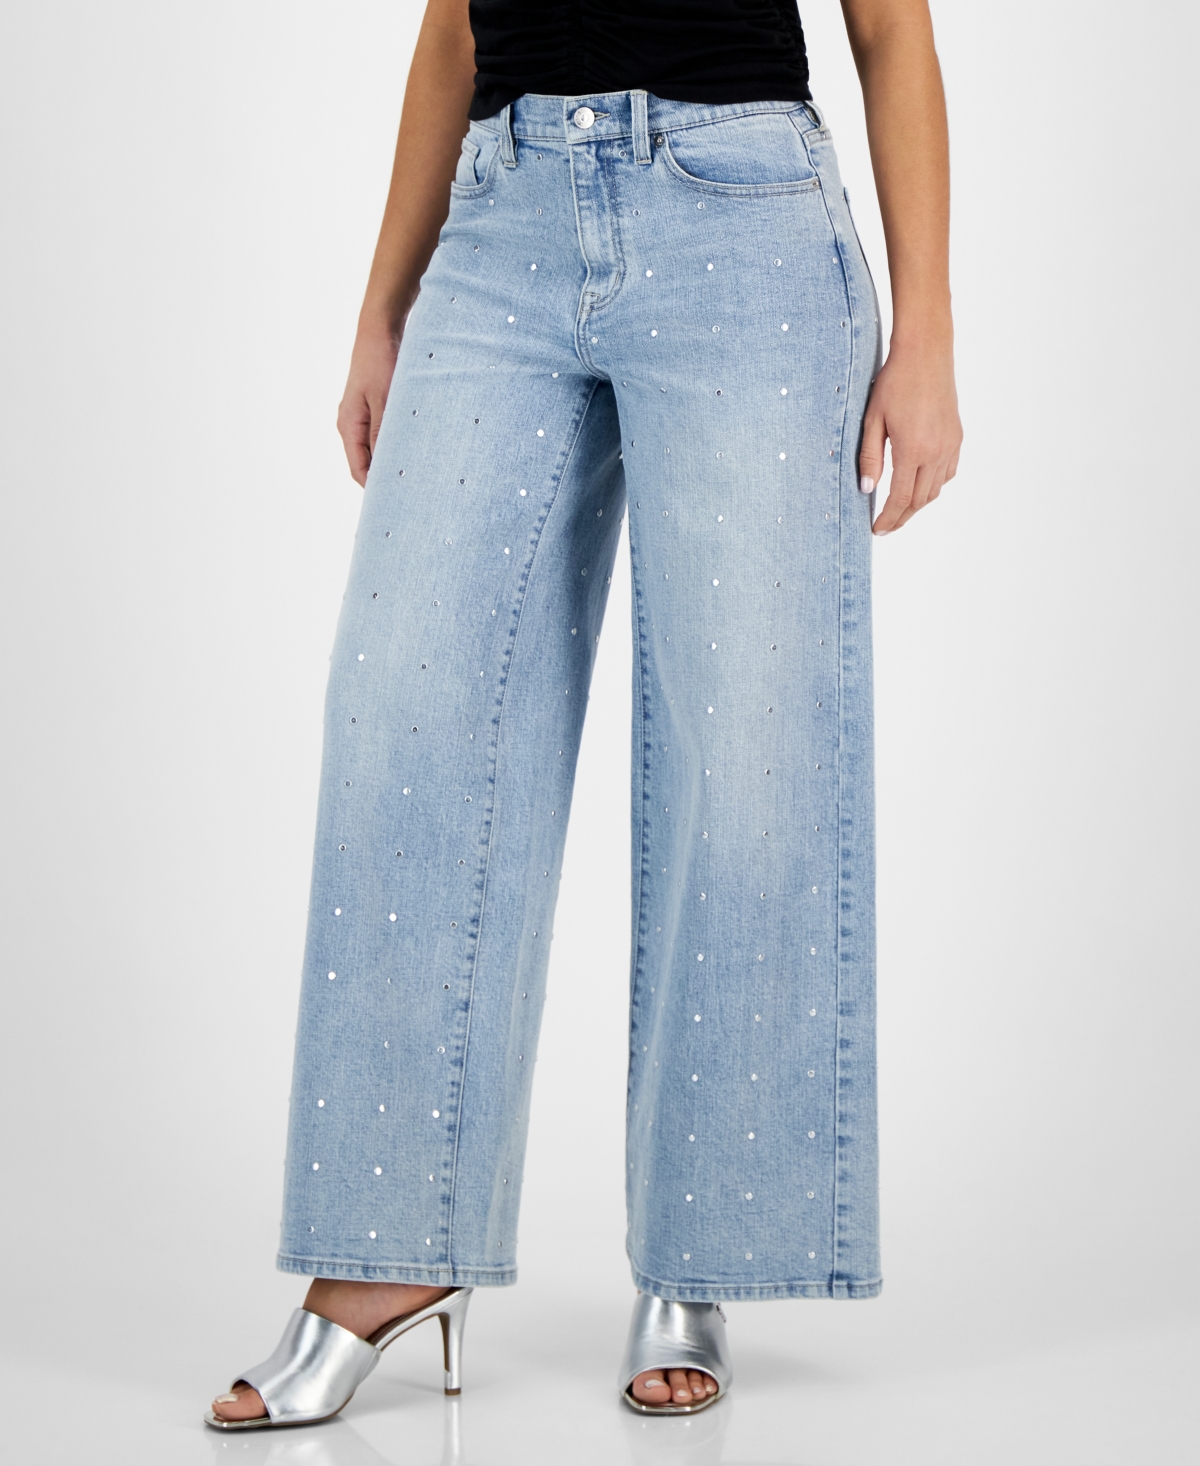 Women's High Rise Studded Wide Leg Jeans - Aw - Atlantic Wash